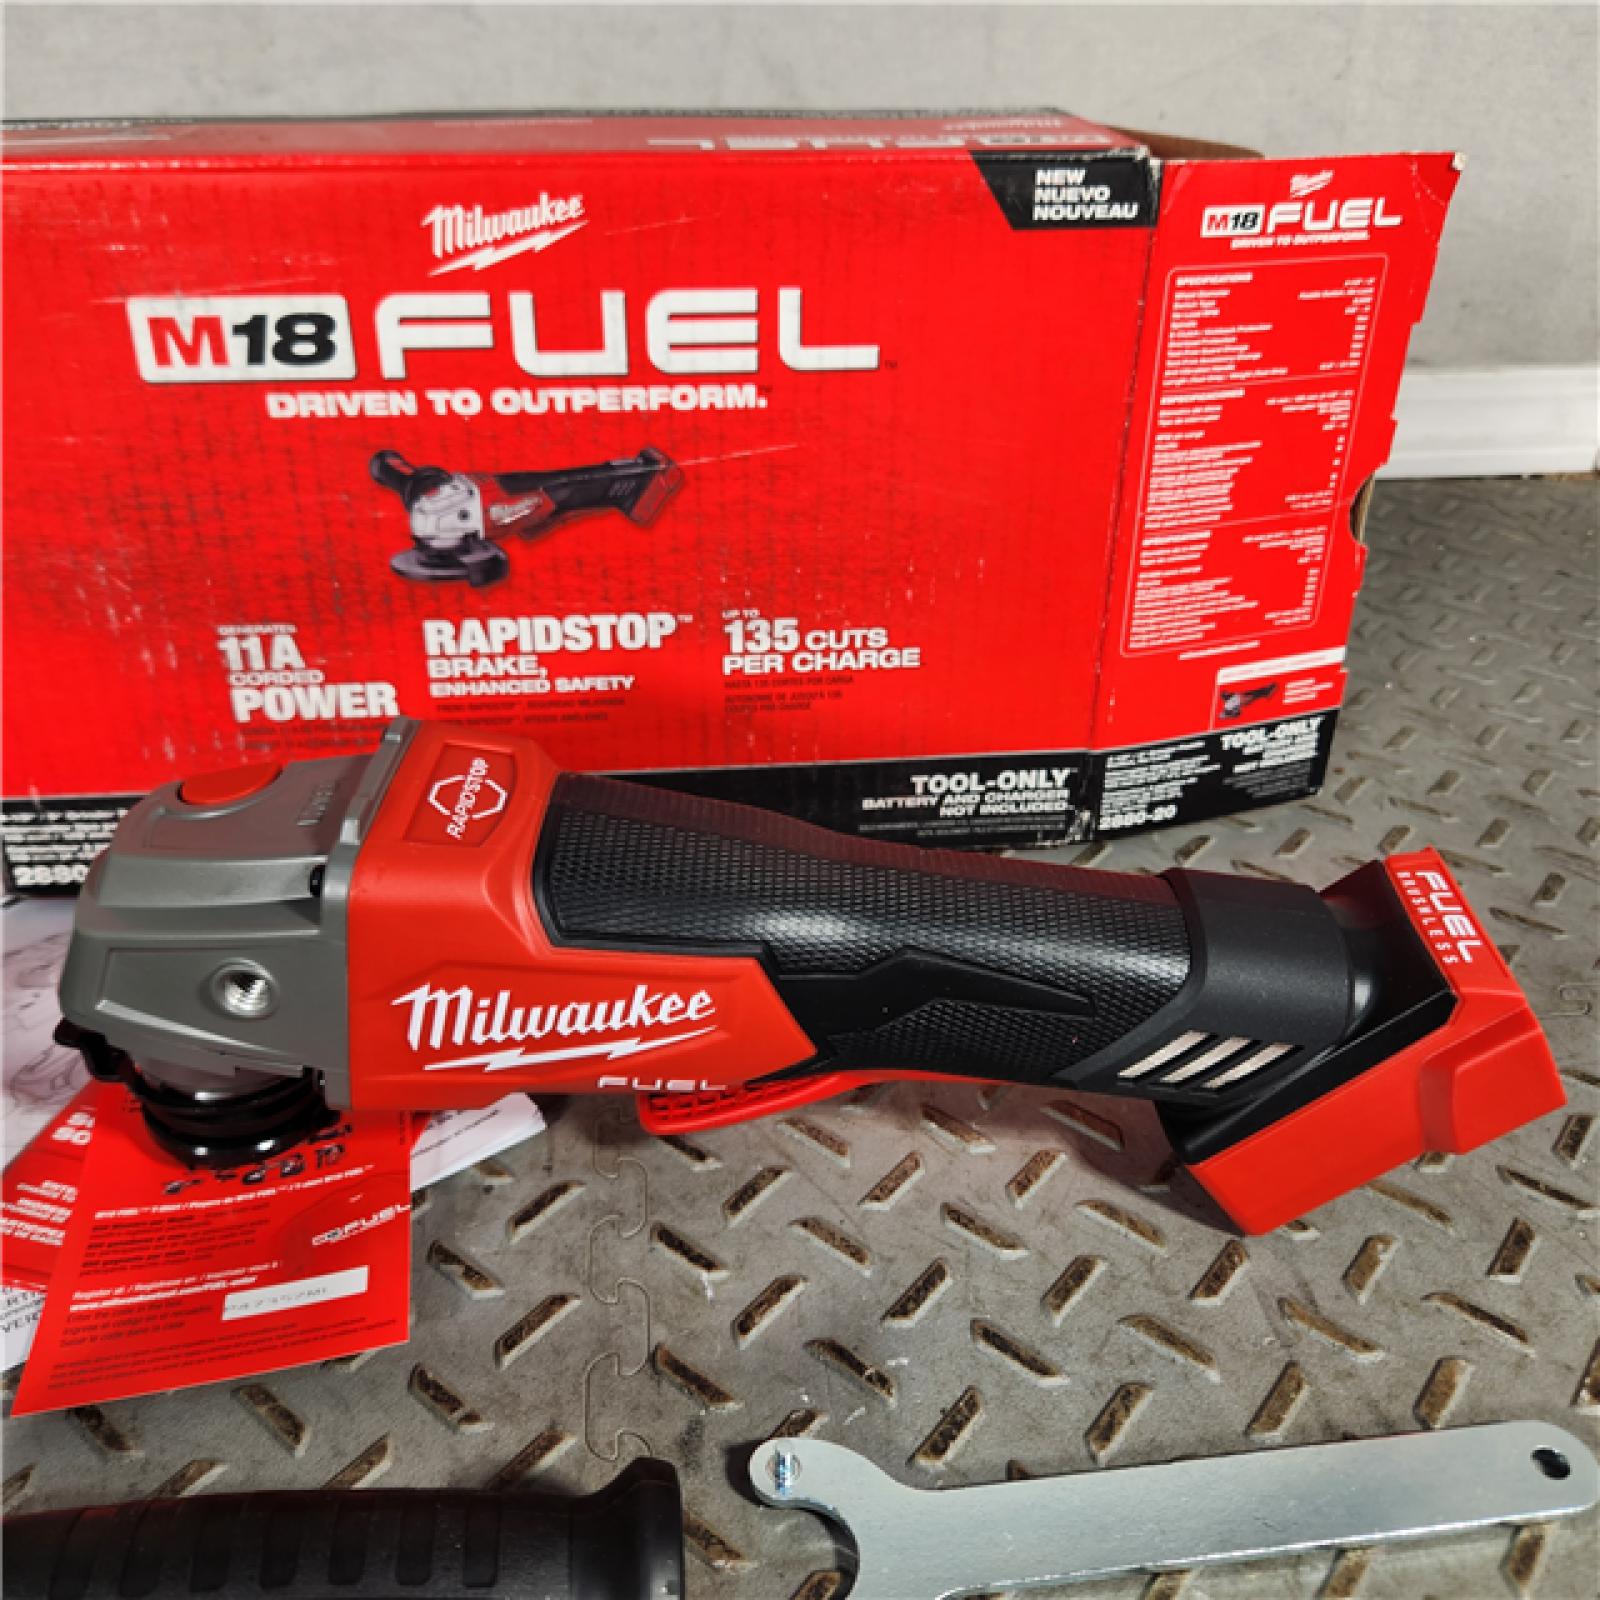 Houston location- AS-IS Milwaukee M18 FUEL 4-1/2/5 Grinder Paddle Switch, No-Lock TOOL-ONLY